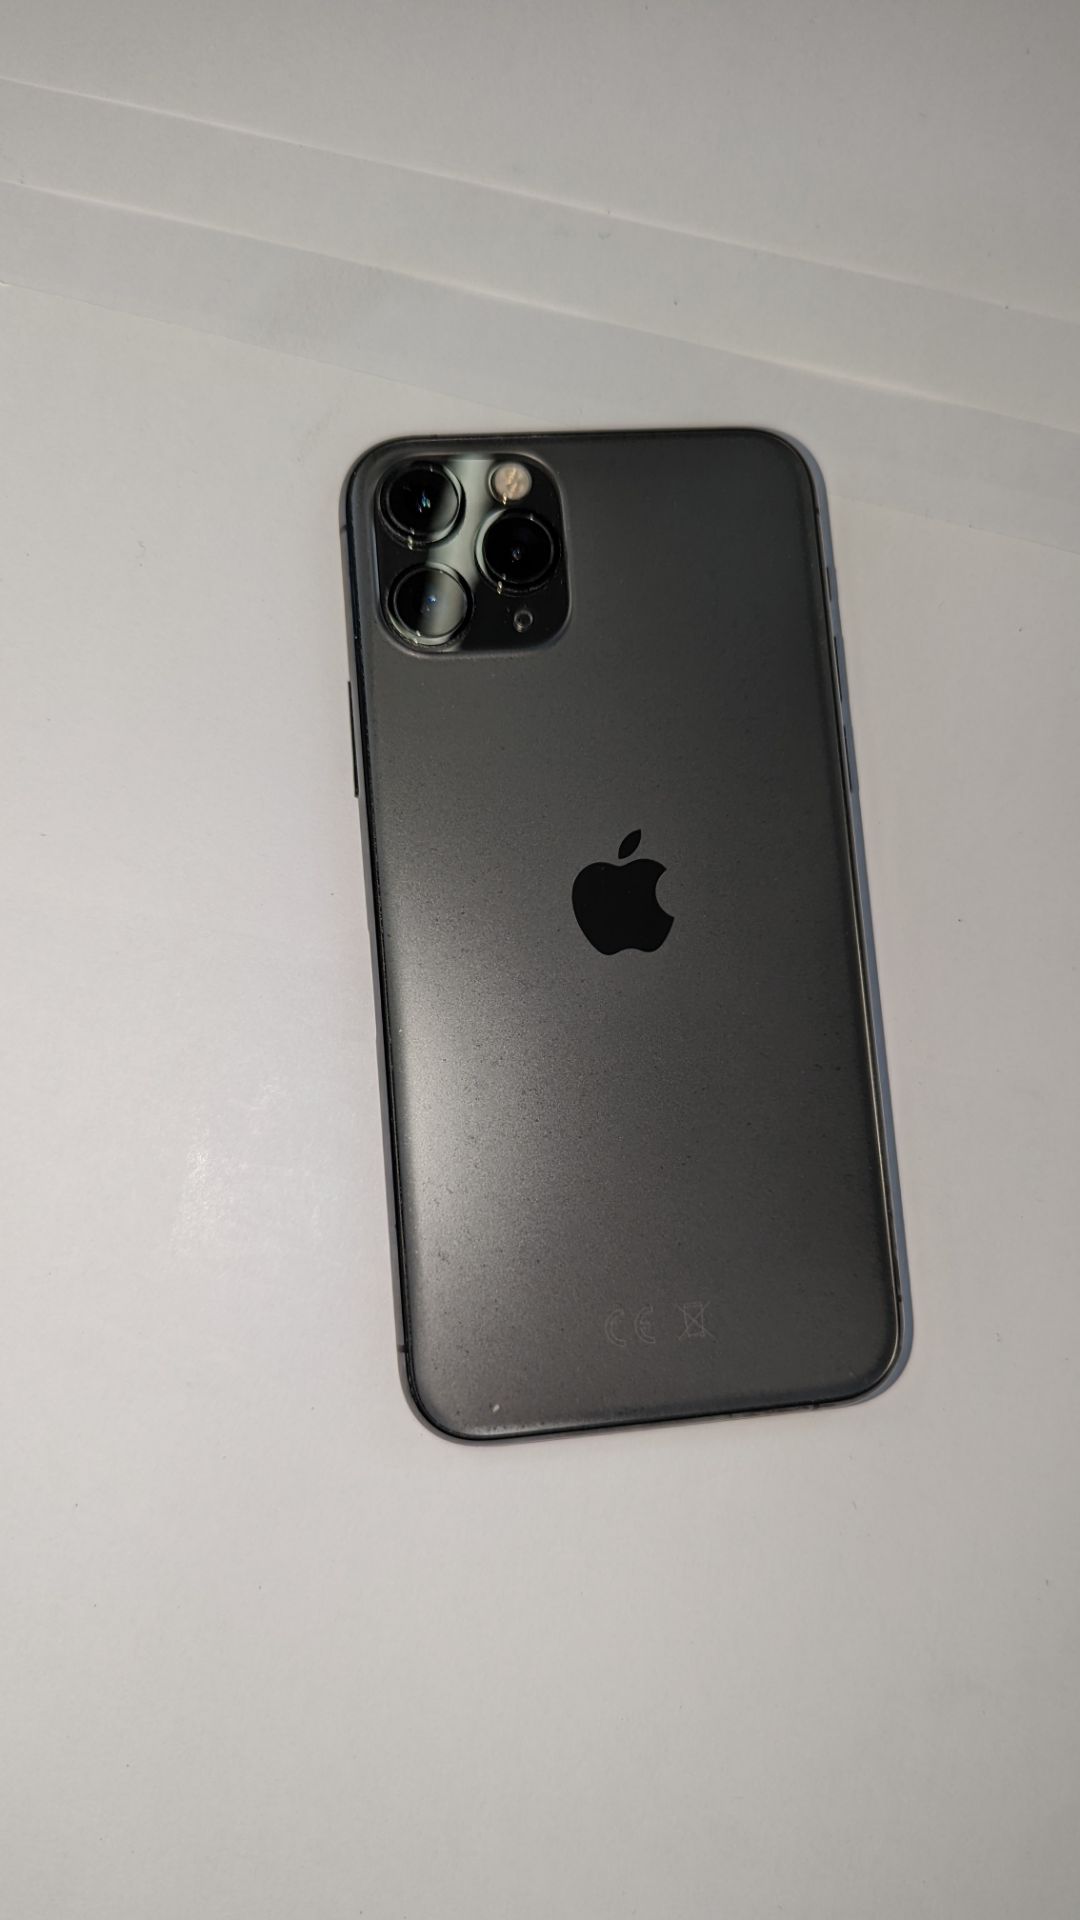 Apple iPhone 11 Pro, 256GB capacity, model MWC72B/A. NB no charger, ancillaries or box - Image 8 of 9